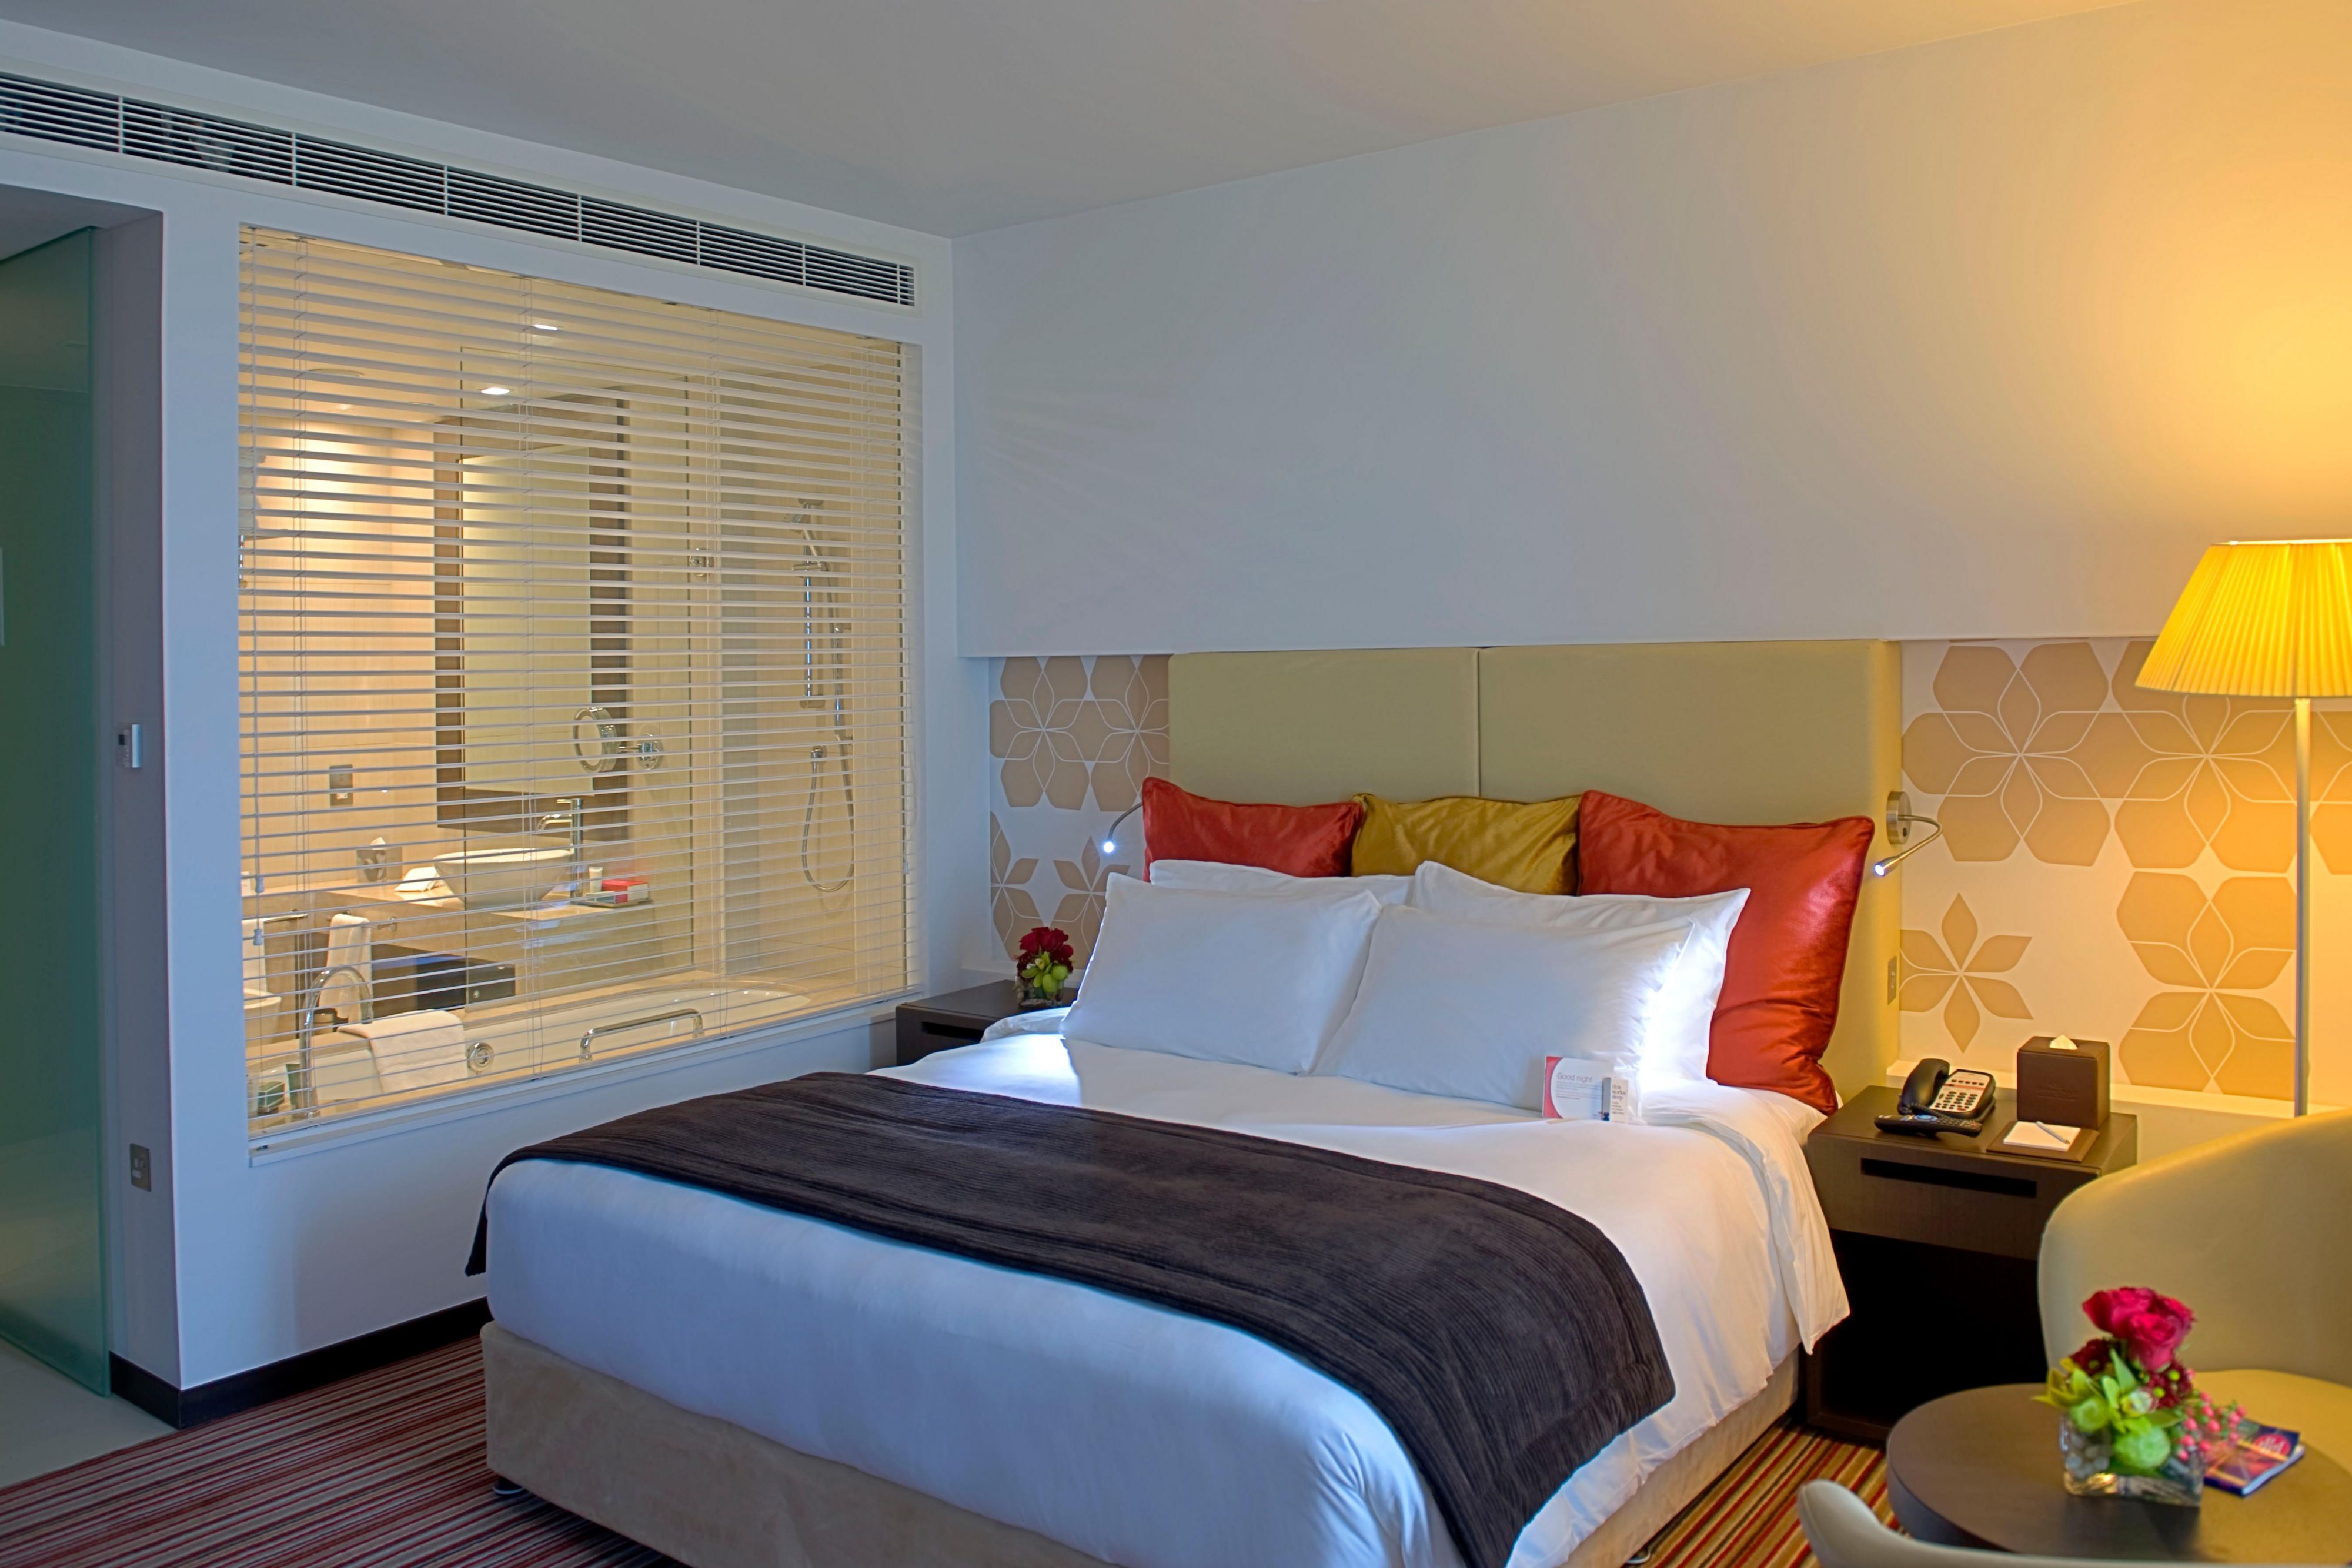 Have a quiet sleep and relaxing stay at our Superior Room